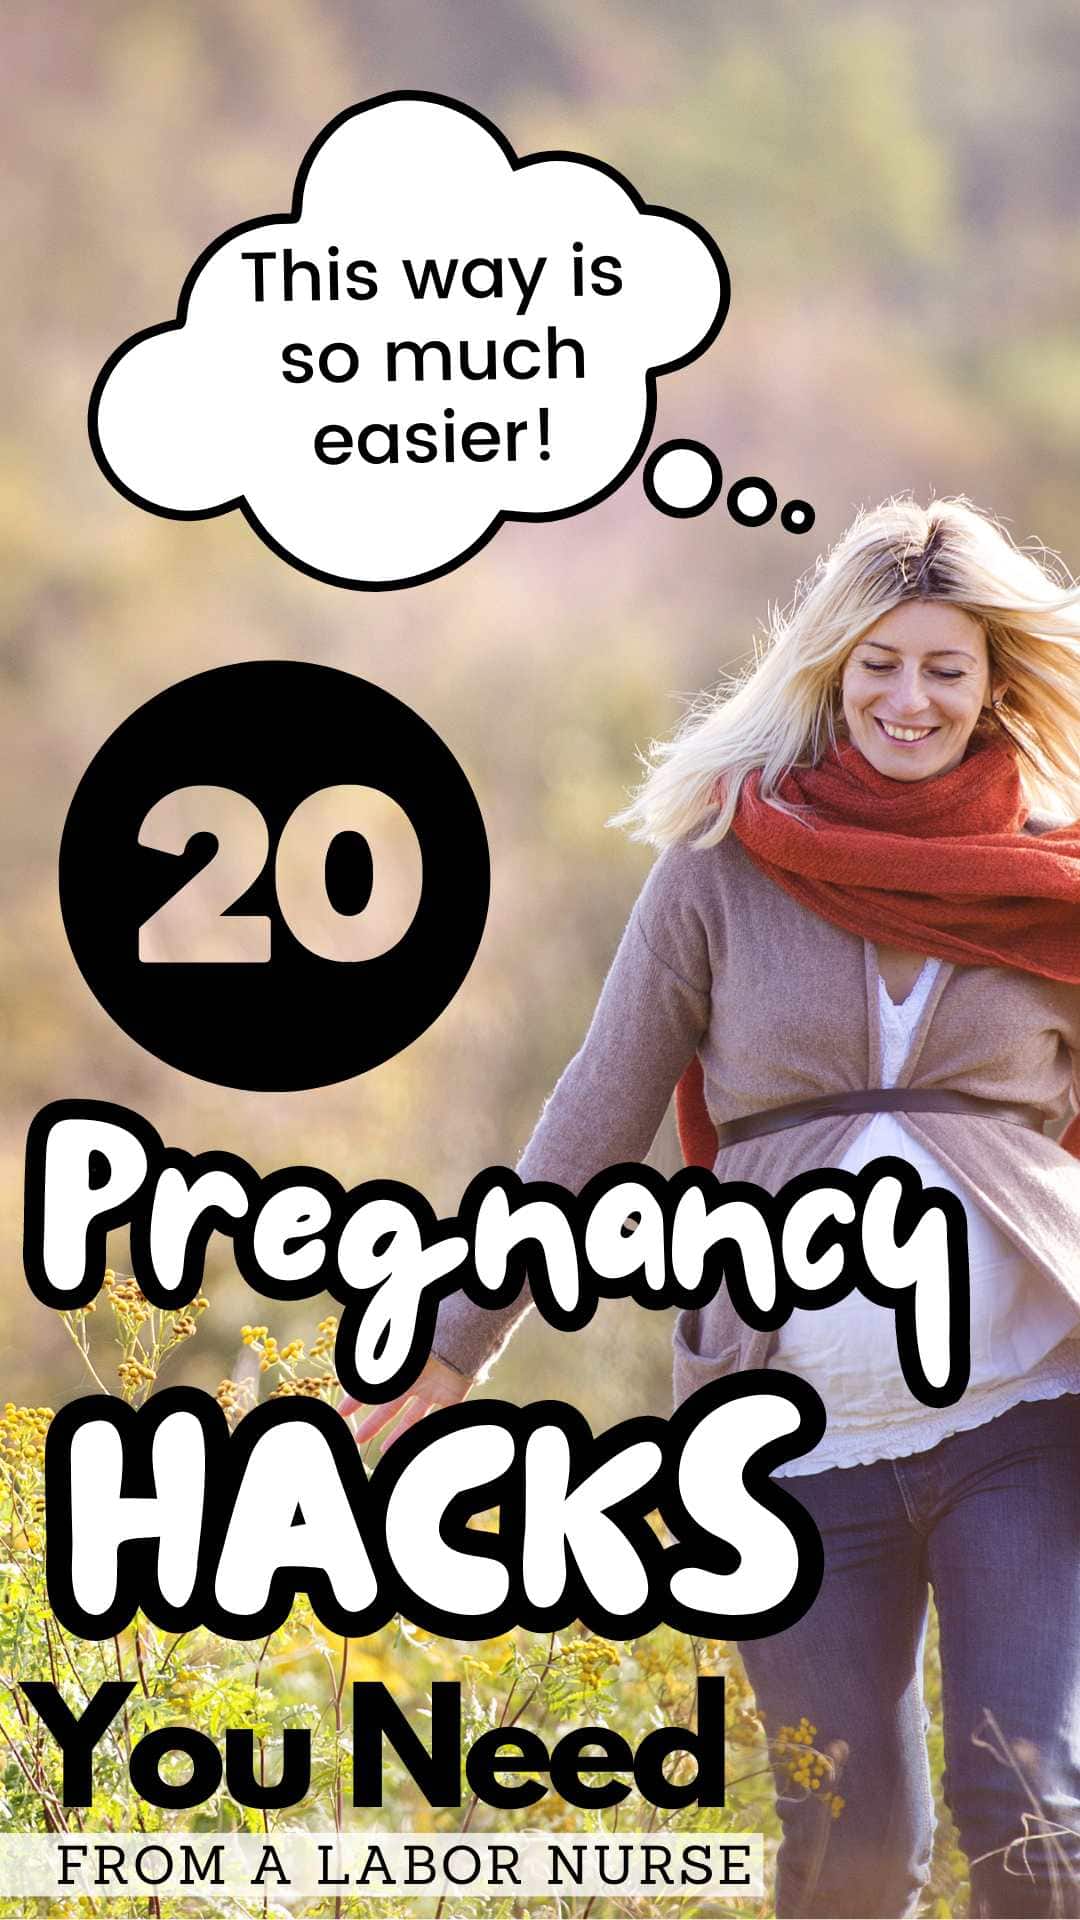 pregnant woman saying "this way is so much easier" // 20 pregnancy hacks you eneed from a labor nurse via @pullingcurls